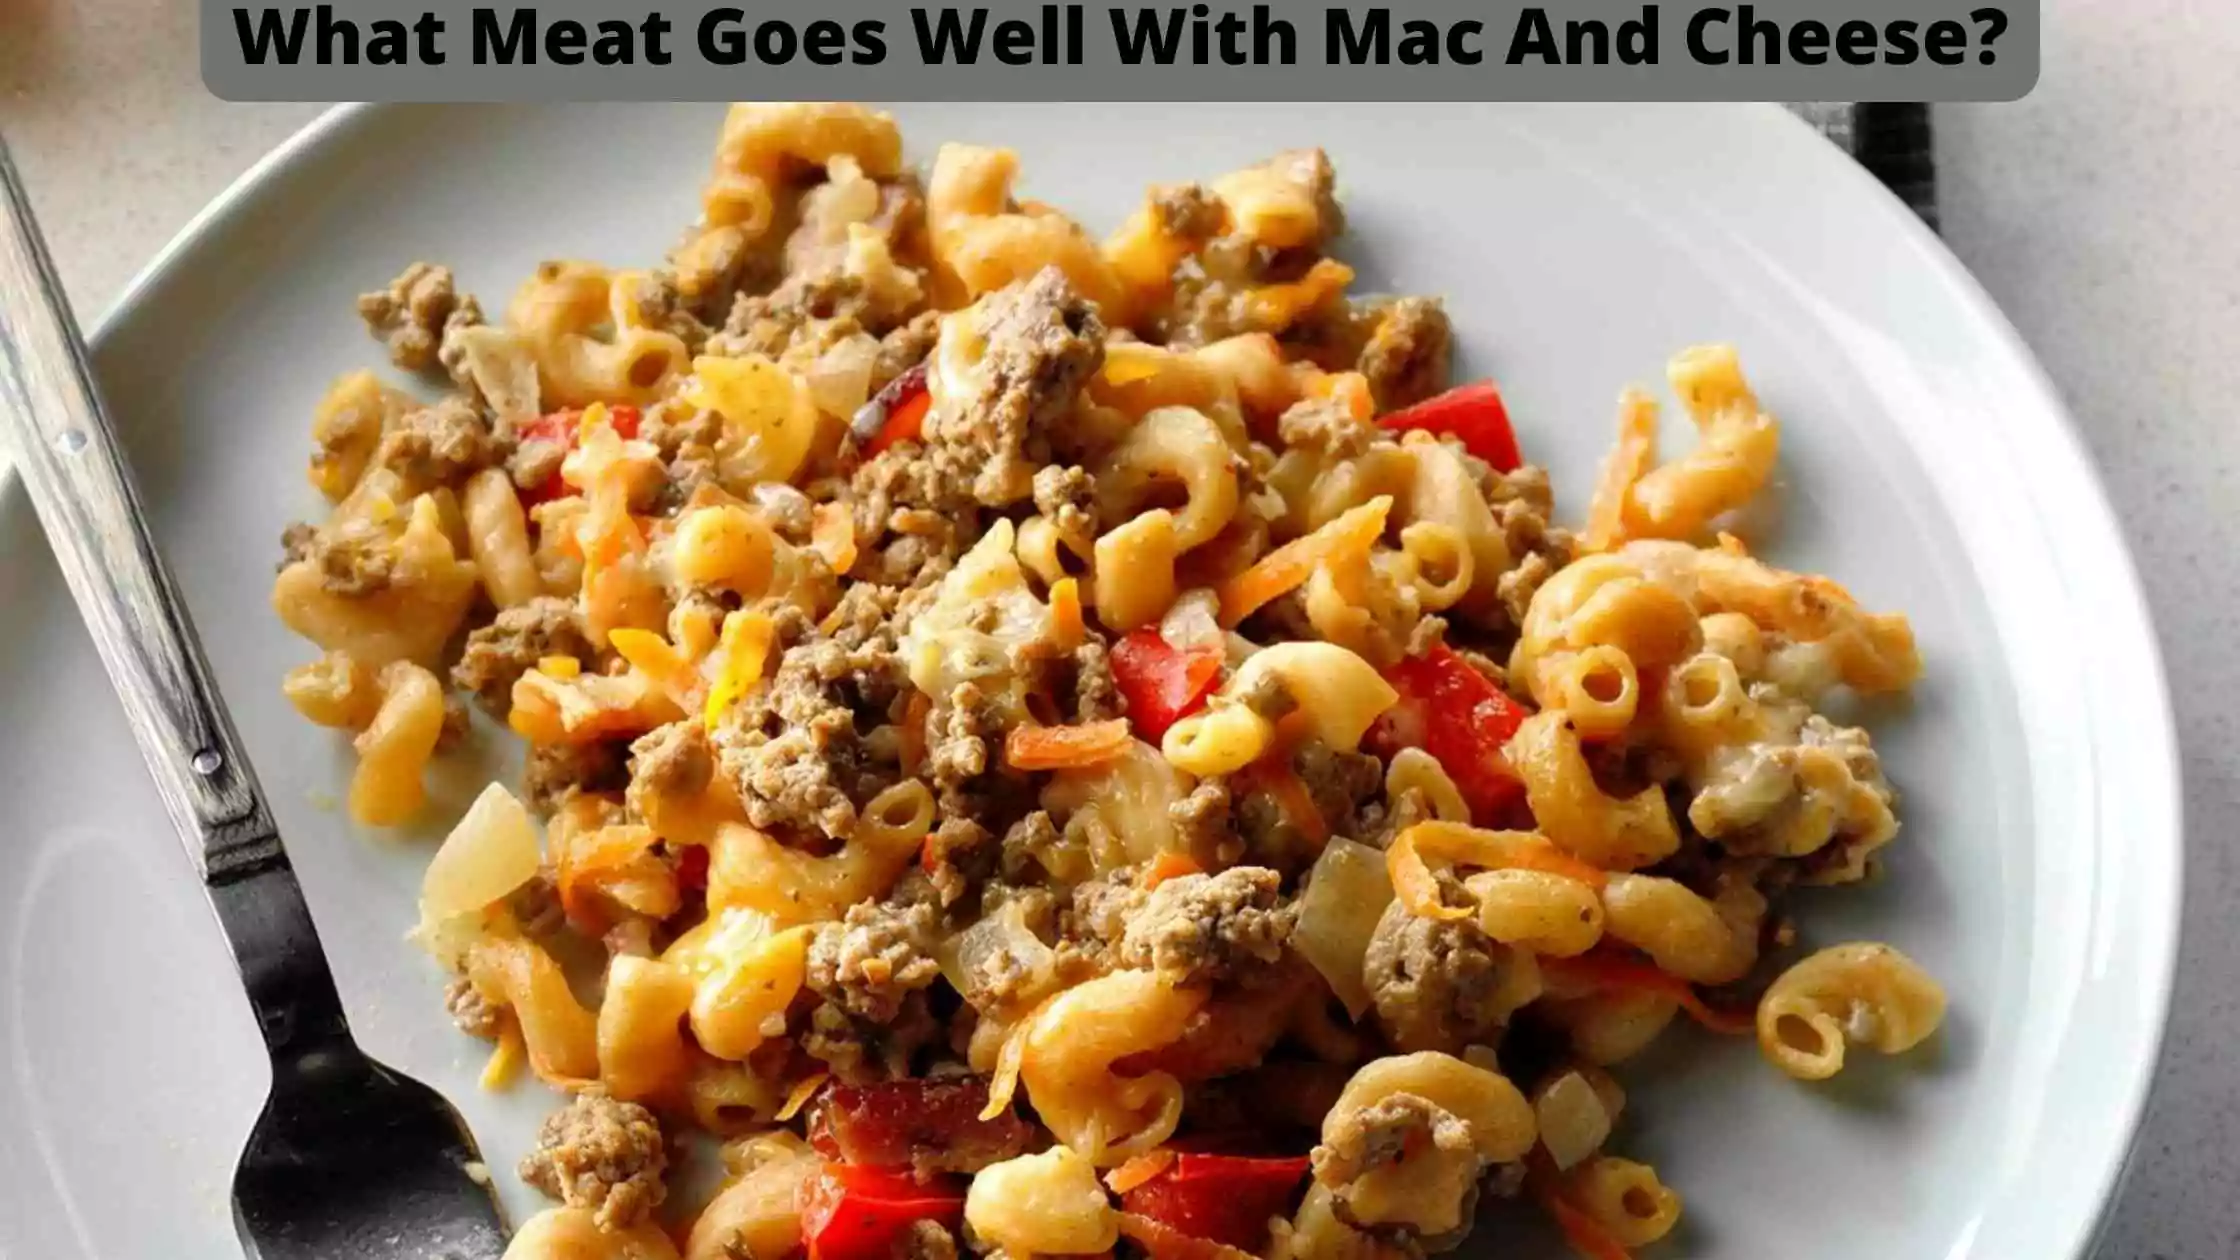 Meat Goes Well With Mac And Cheese